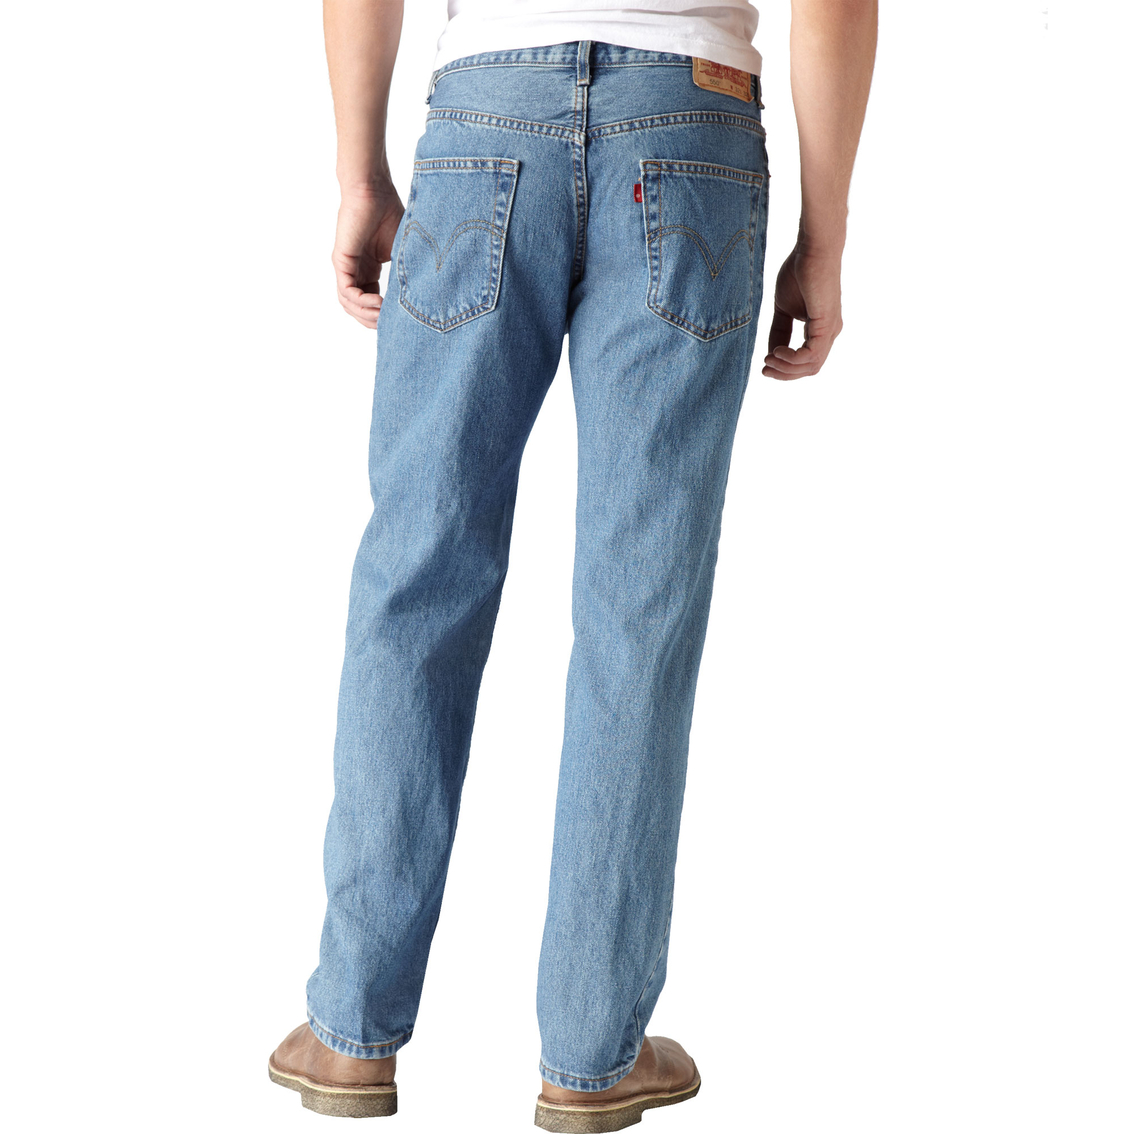 Levi's 550 5 Pocket Relaxed Fit Jeans - Image 2 of 2